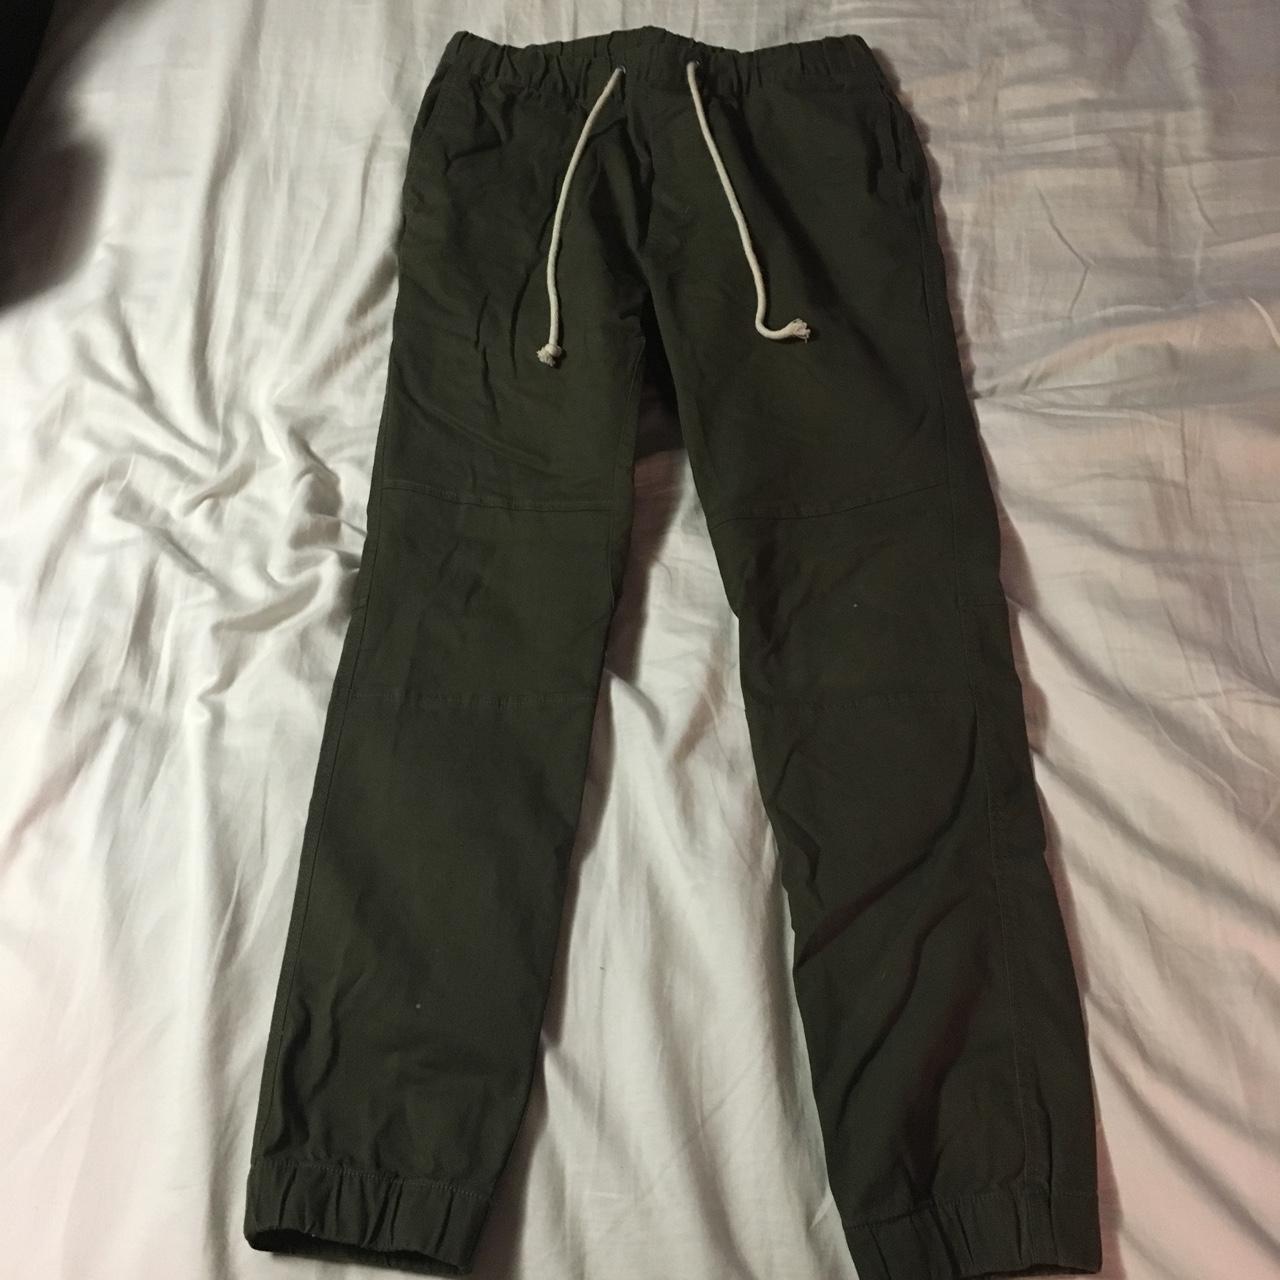 Olive/army green joggers. - Depop